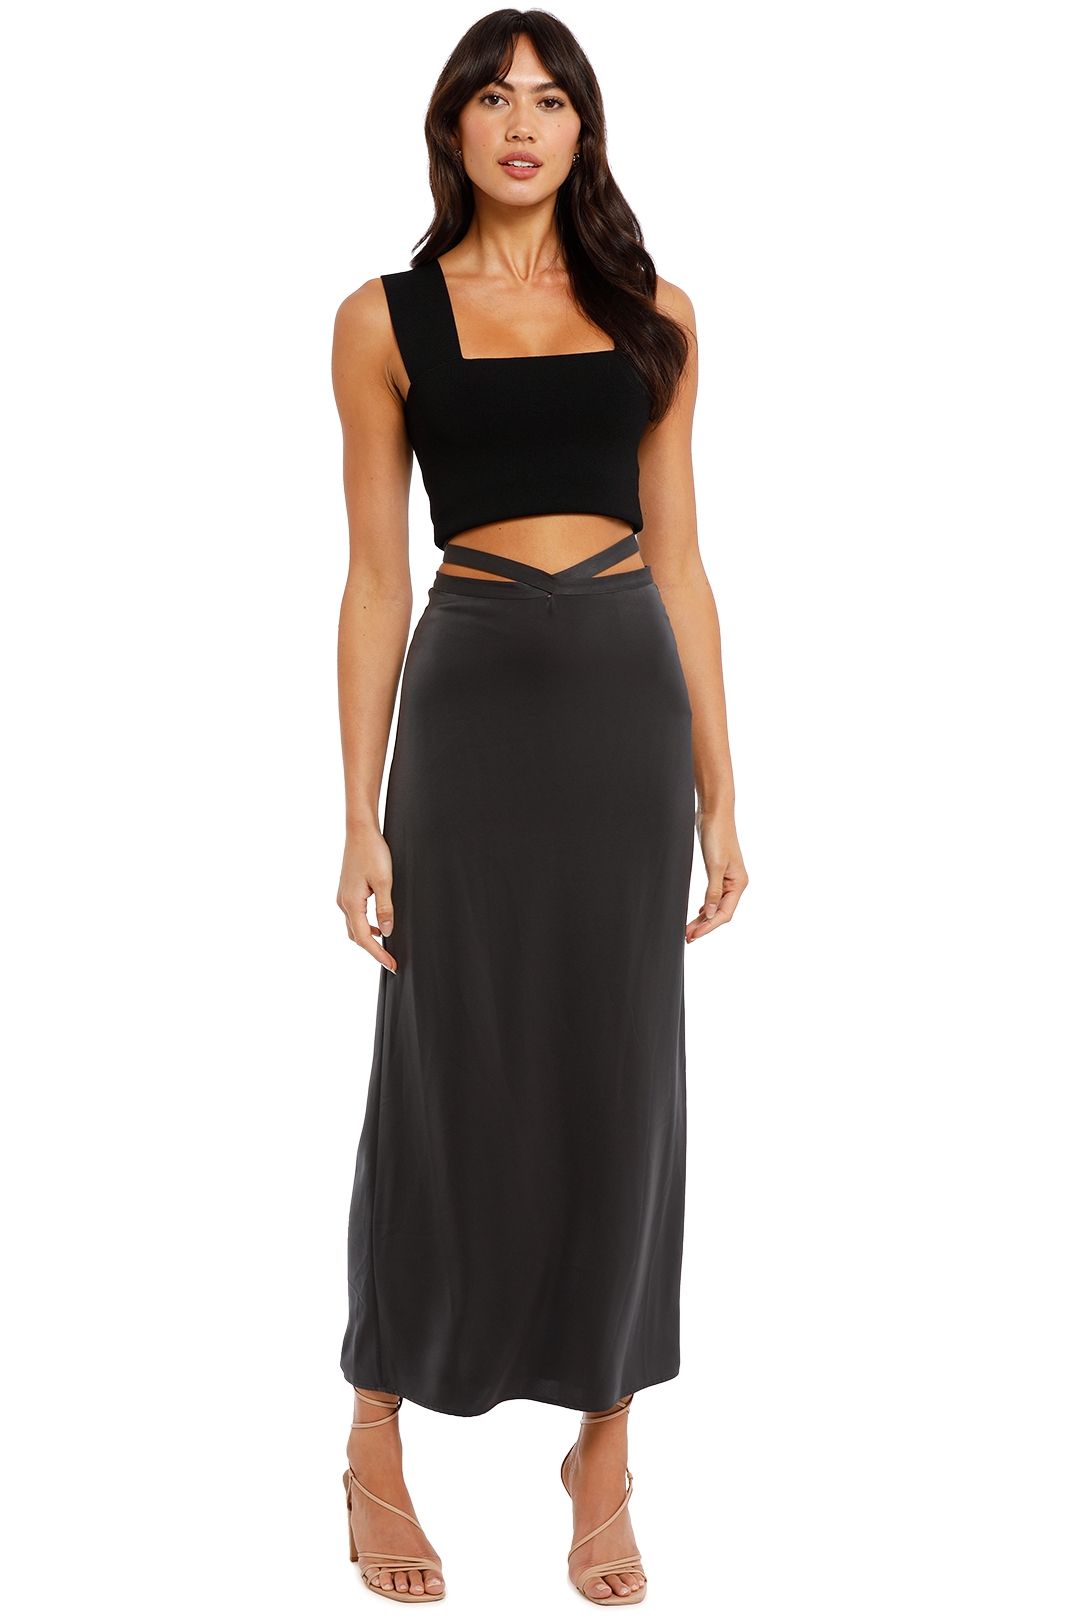 Camilla and Marc Solar Tie Skirt in Charcoal Midi Length